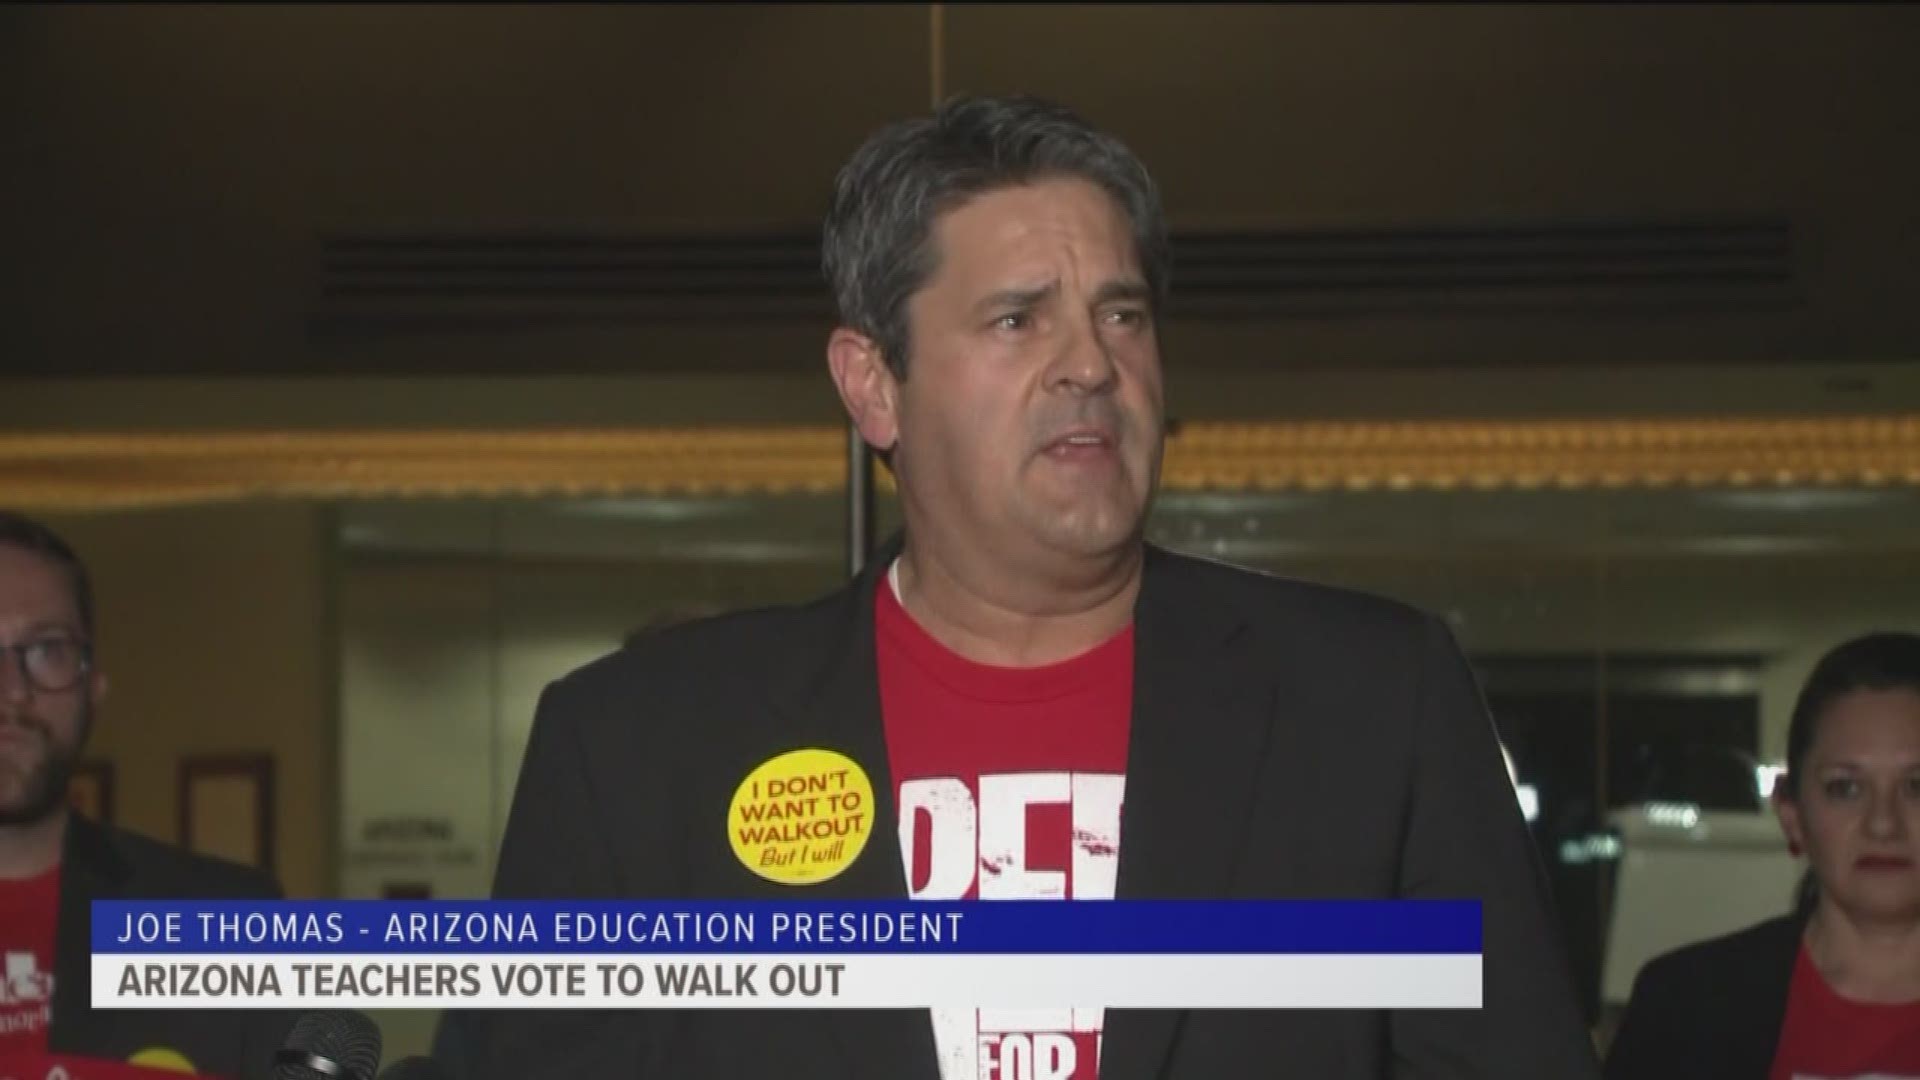 If their walkout this week doesn't produce results, Arizona teachers could push for a statewide vote on raising taxes to fund schools.